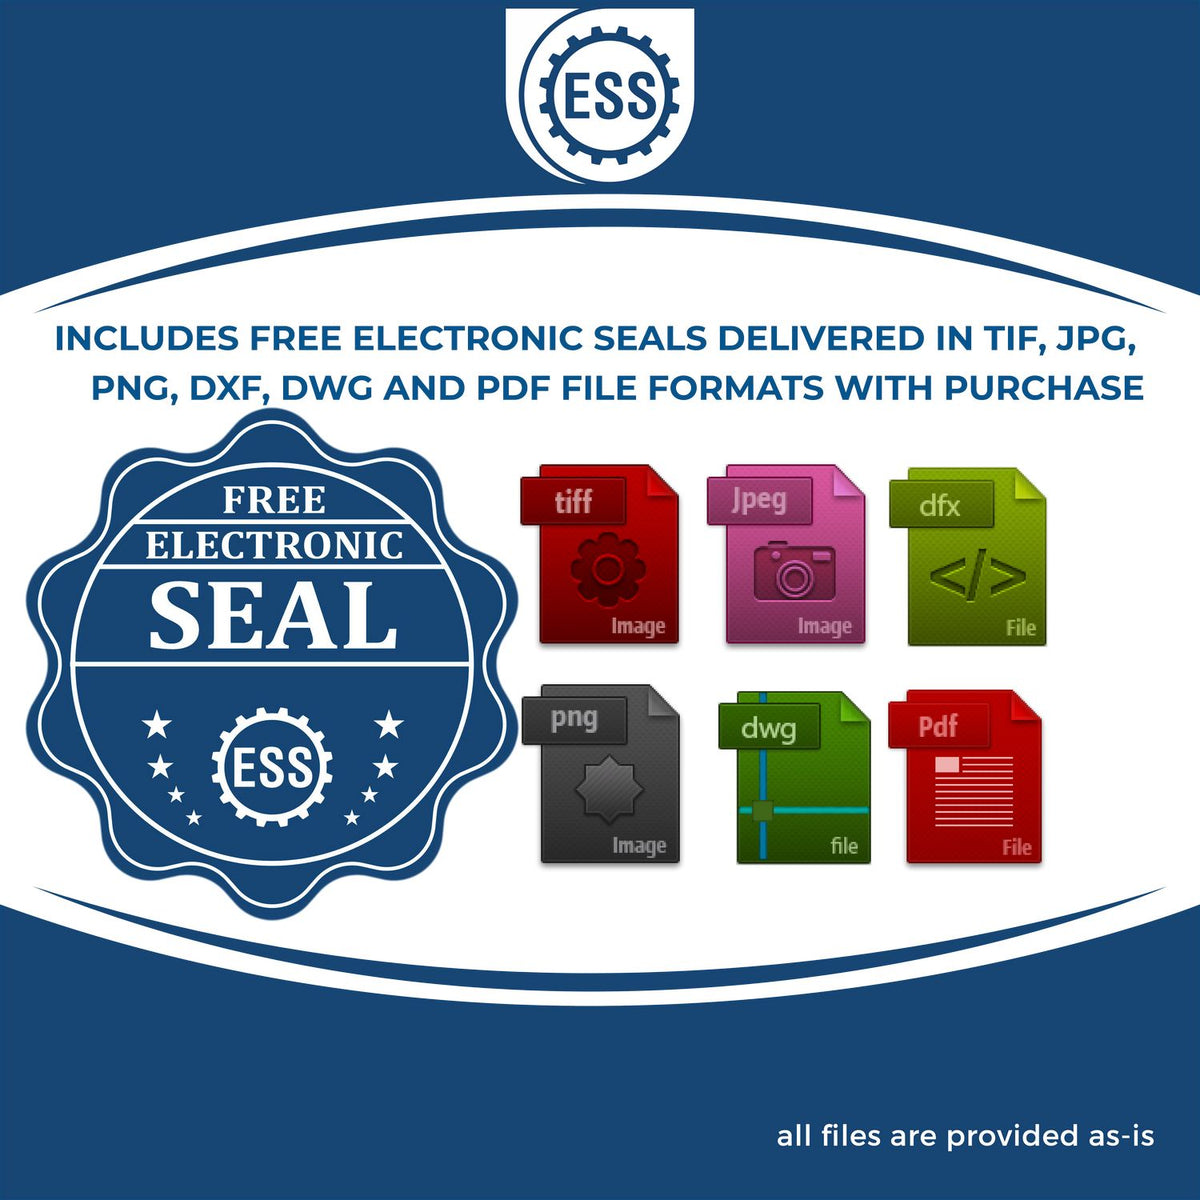 An infographic for the free electronic seal for the Slim Pre-Inked Maine Professional Geologist Seal Stamp illustrating the different file type icons such as DXF, DWG, TIF, JPG and PNG.